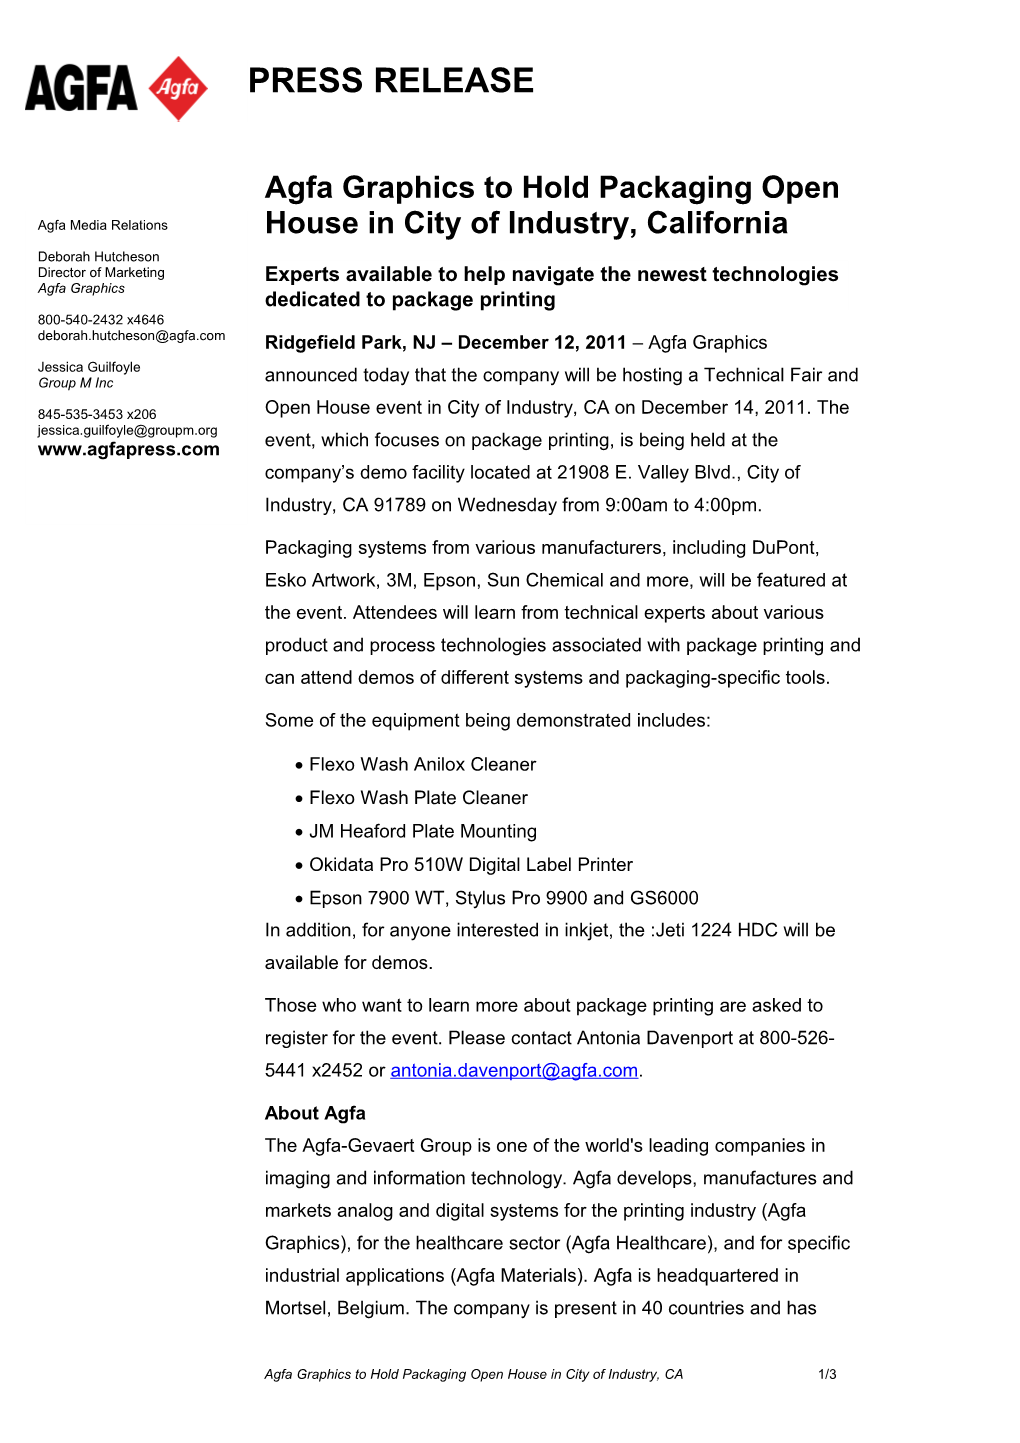 Agfa Graphics to Hold Packaging Open House in City of Industry, California